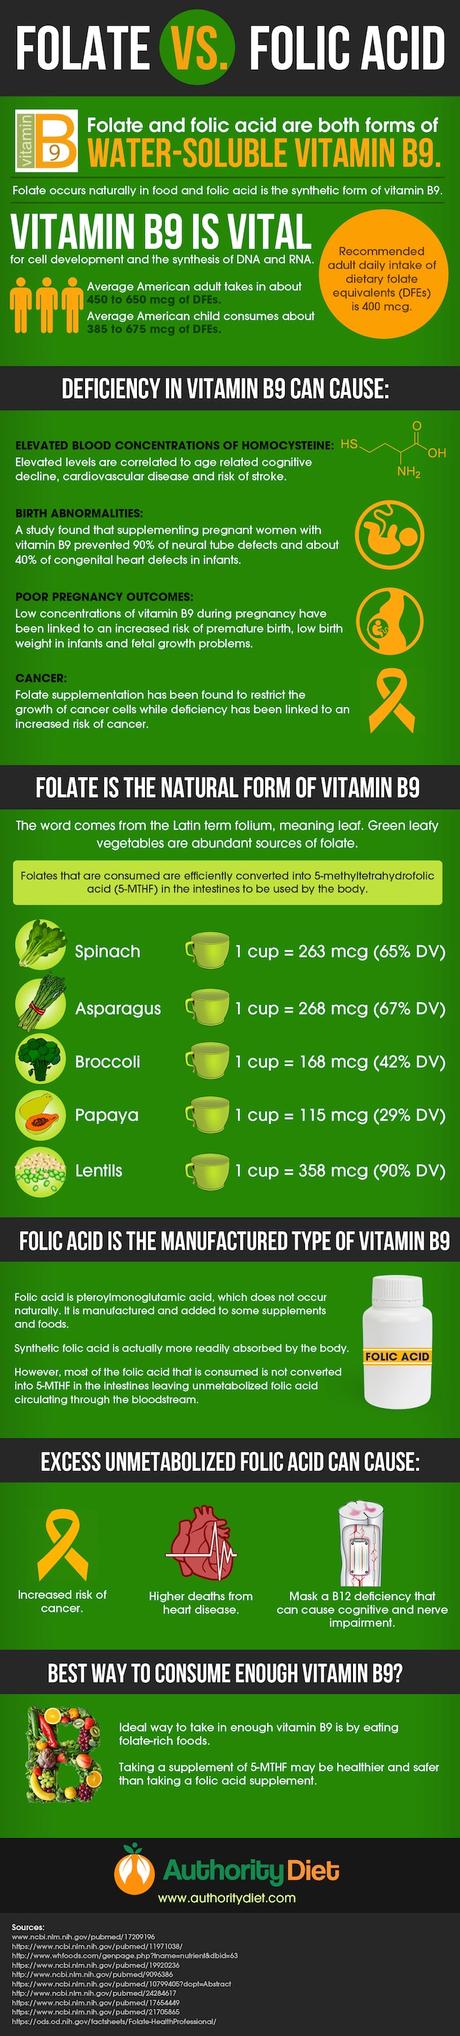 Folate vs. Folic Acid: What’s the Difference? (Not the Same)